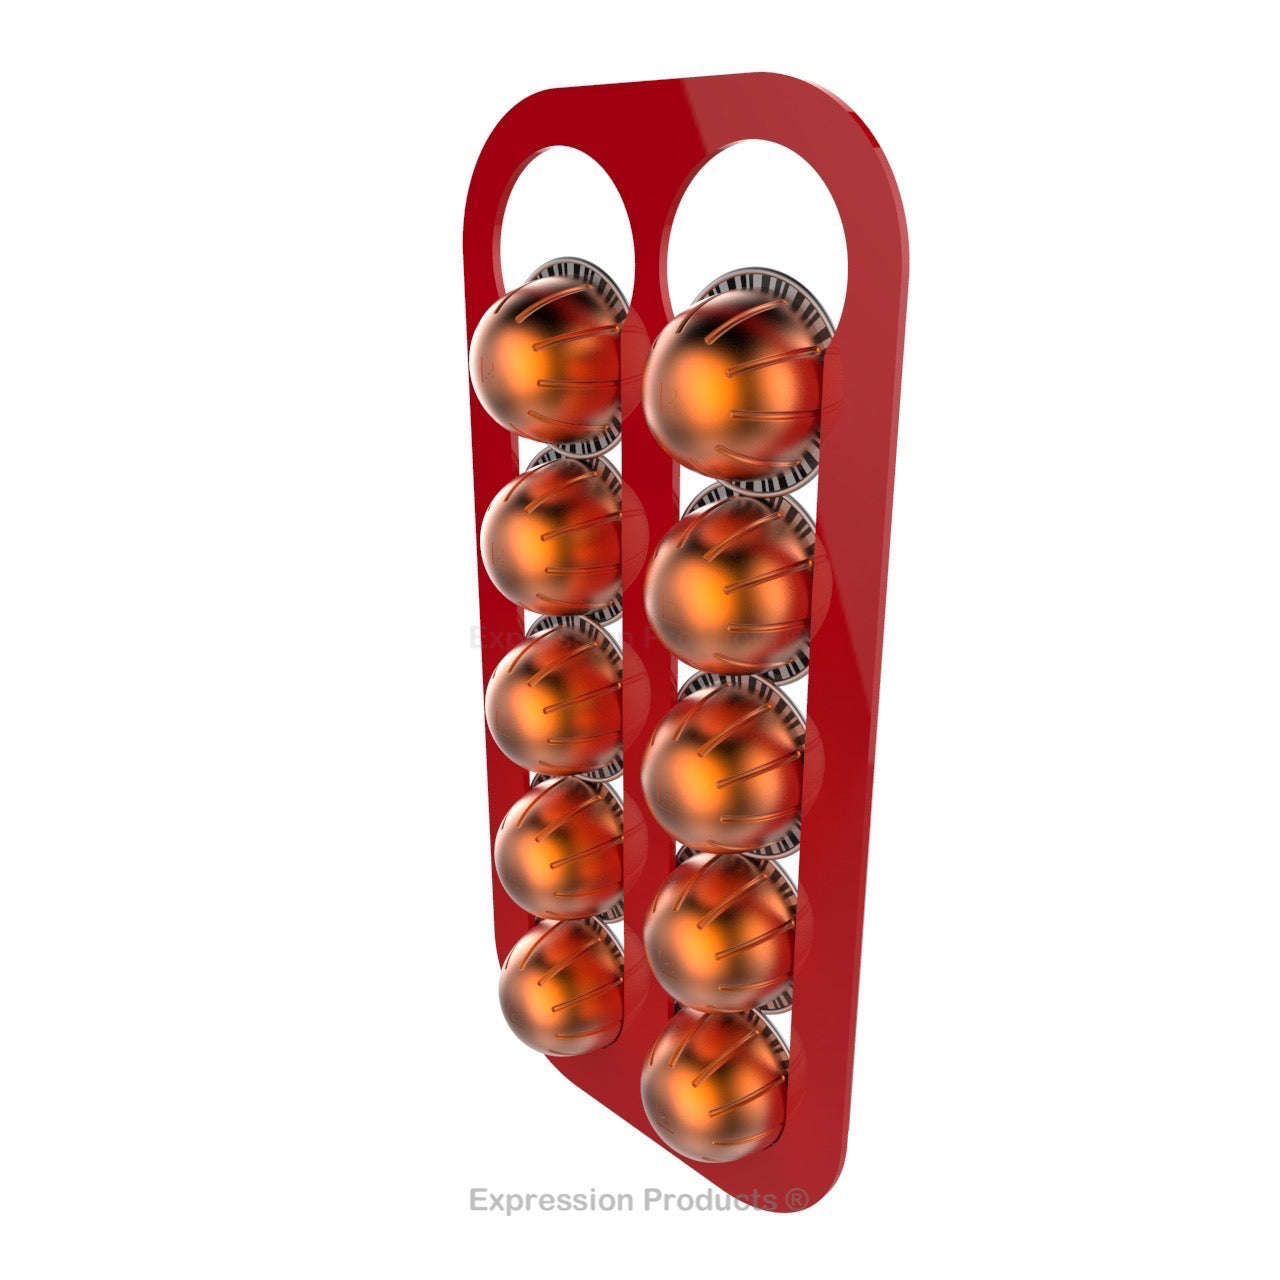 Magnetic Nespresso Vertuo capsule holder shown in red holding 10 pods